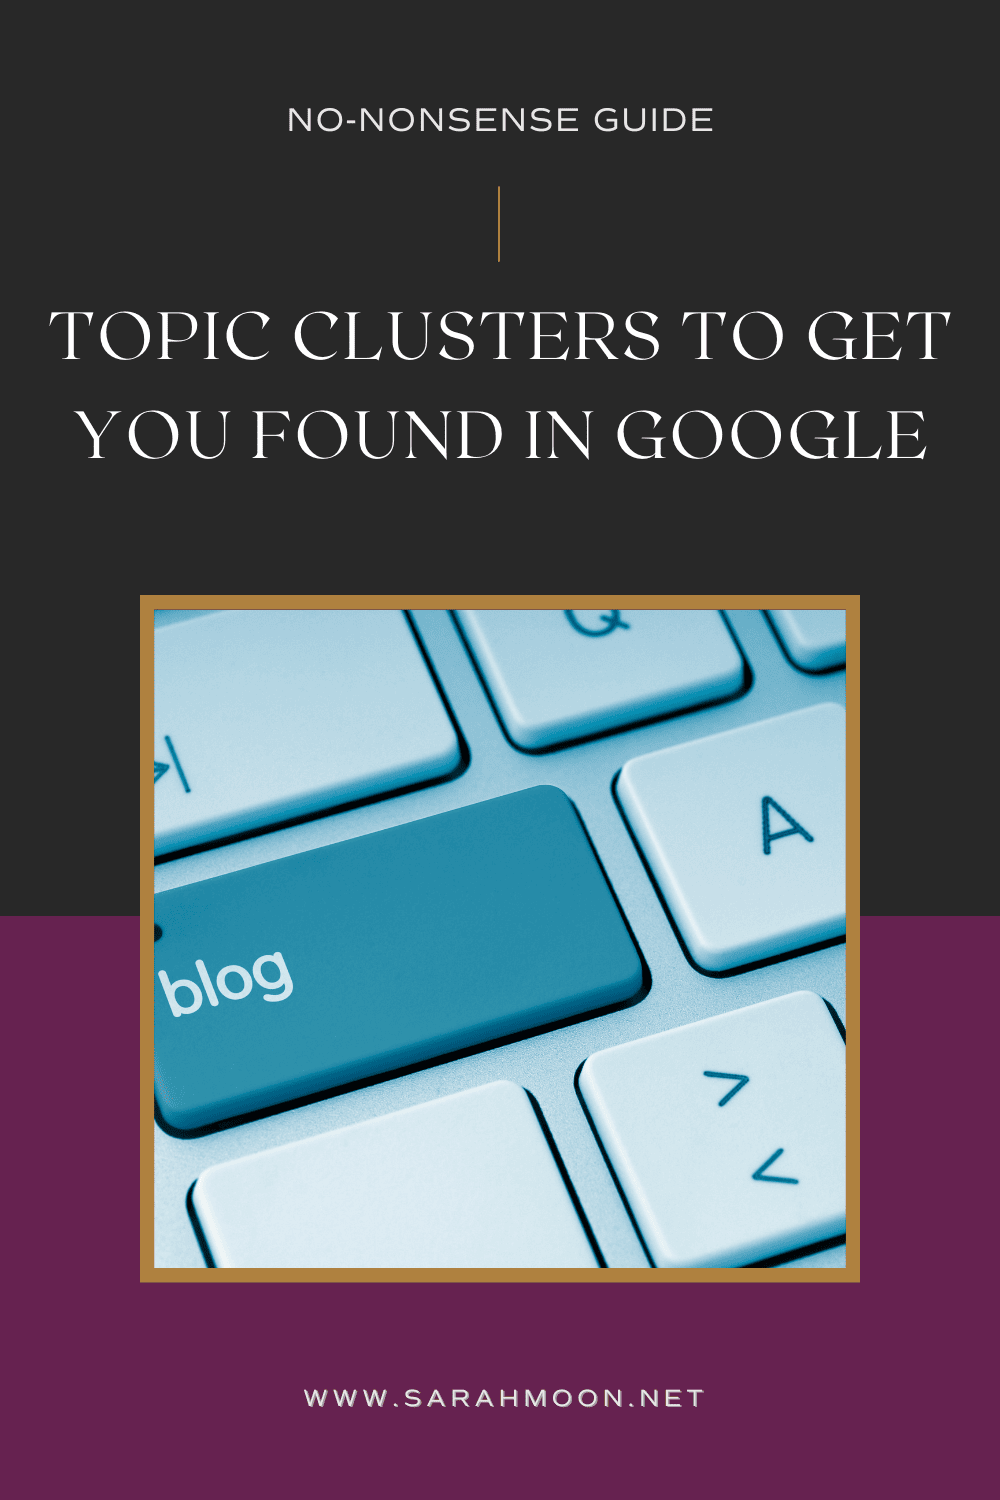 Topic Clusters to Get You Found in Google